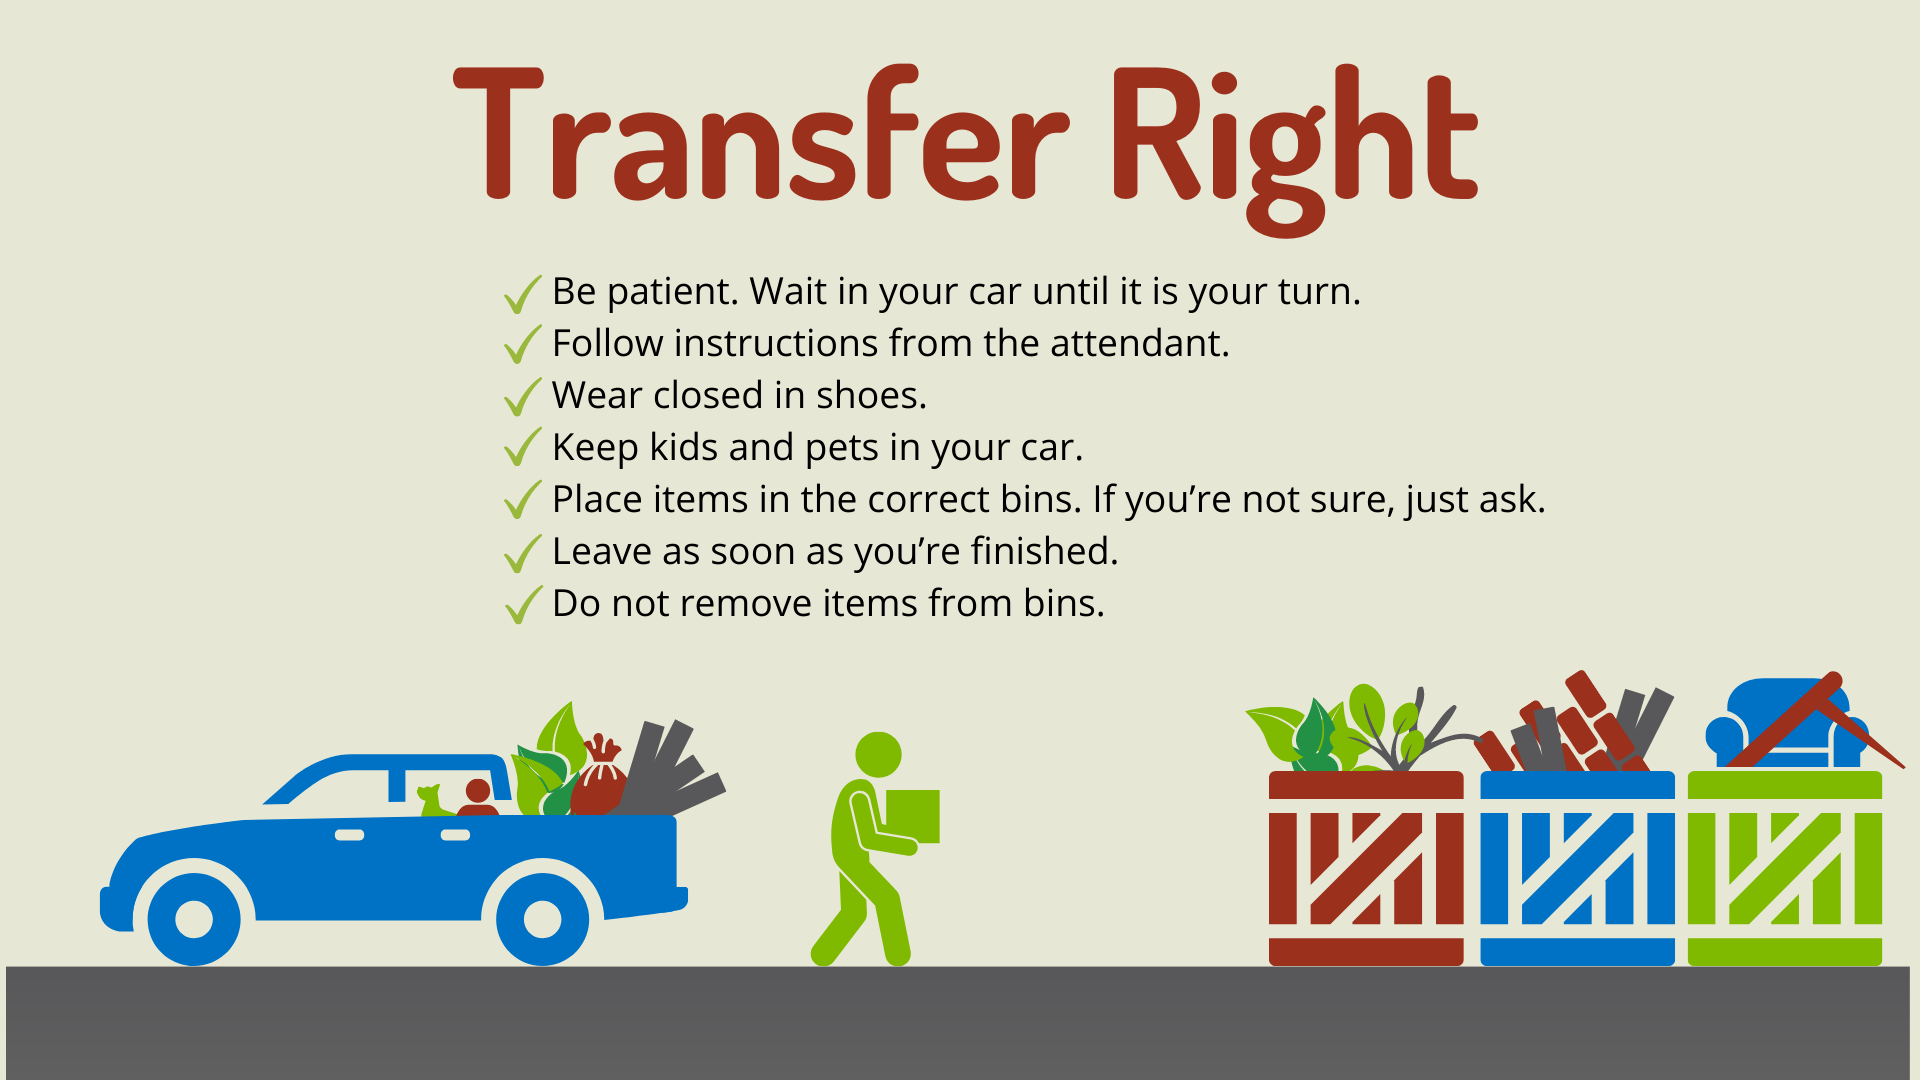 How to transfer right. Be patient. Wait in your car until it is your turn. Follow instructions from the attendant. Wear closed in shoes. Keep kids and pets in your car. Place items in the correct bins. If you’re not sure, just ask. Leave as soon as you’re finished. Do not remove items from bins.